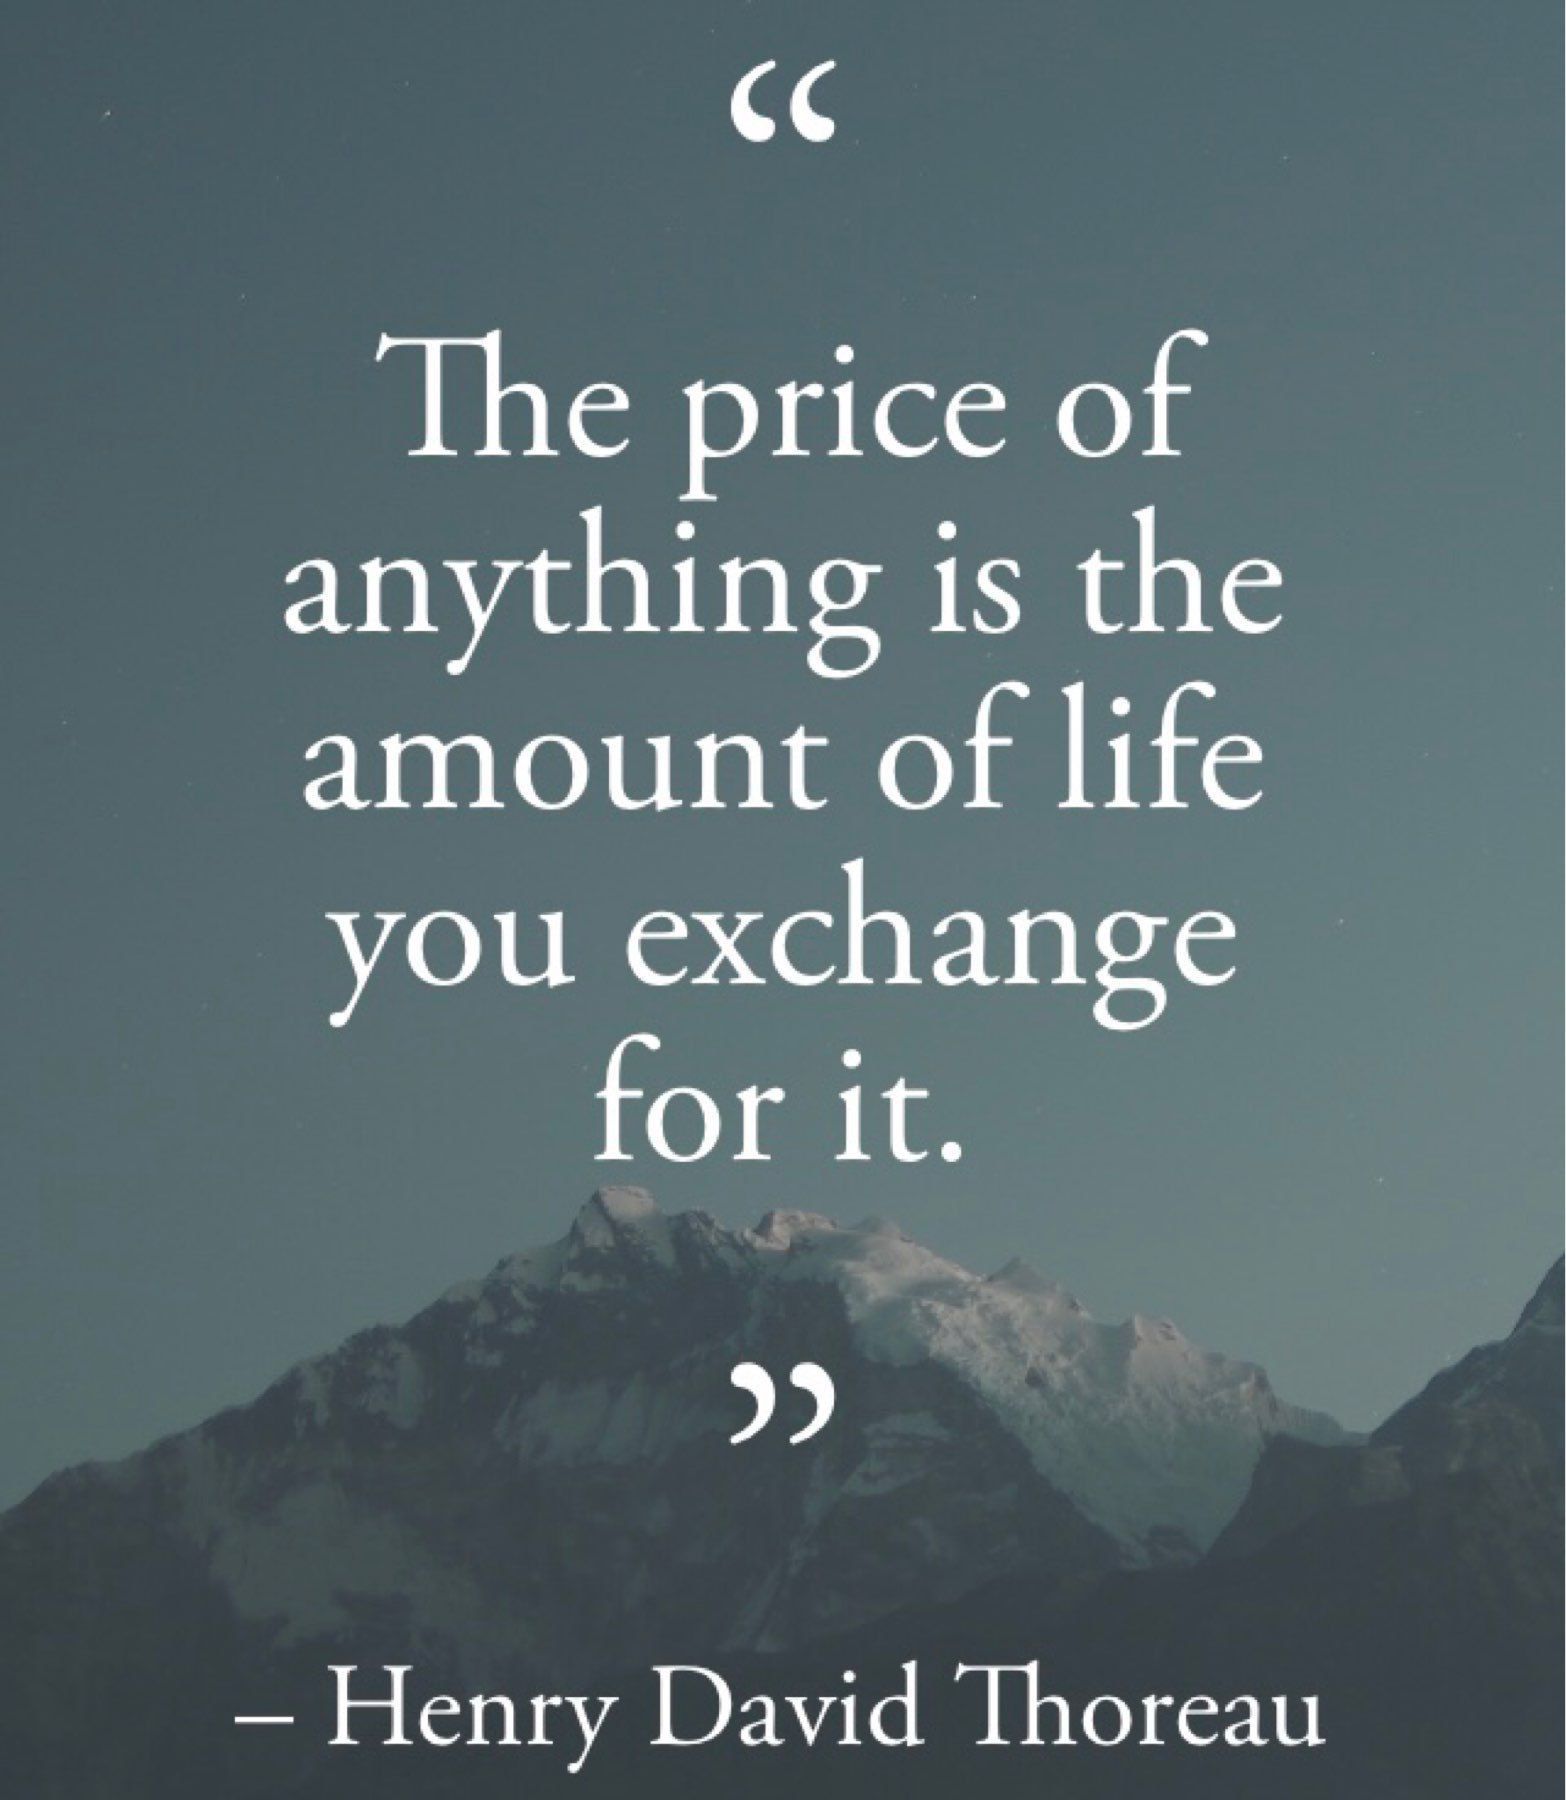 The price of anythjng is the amount of life you exchange for it -Thoreau